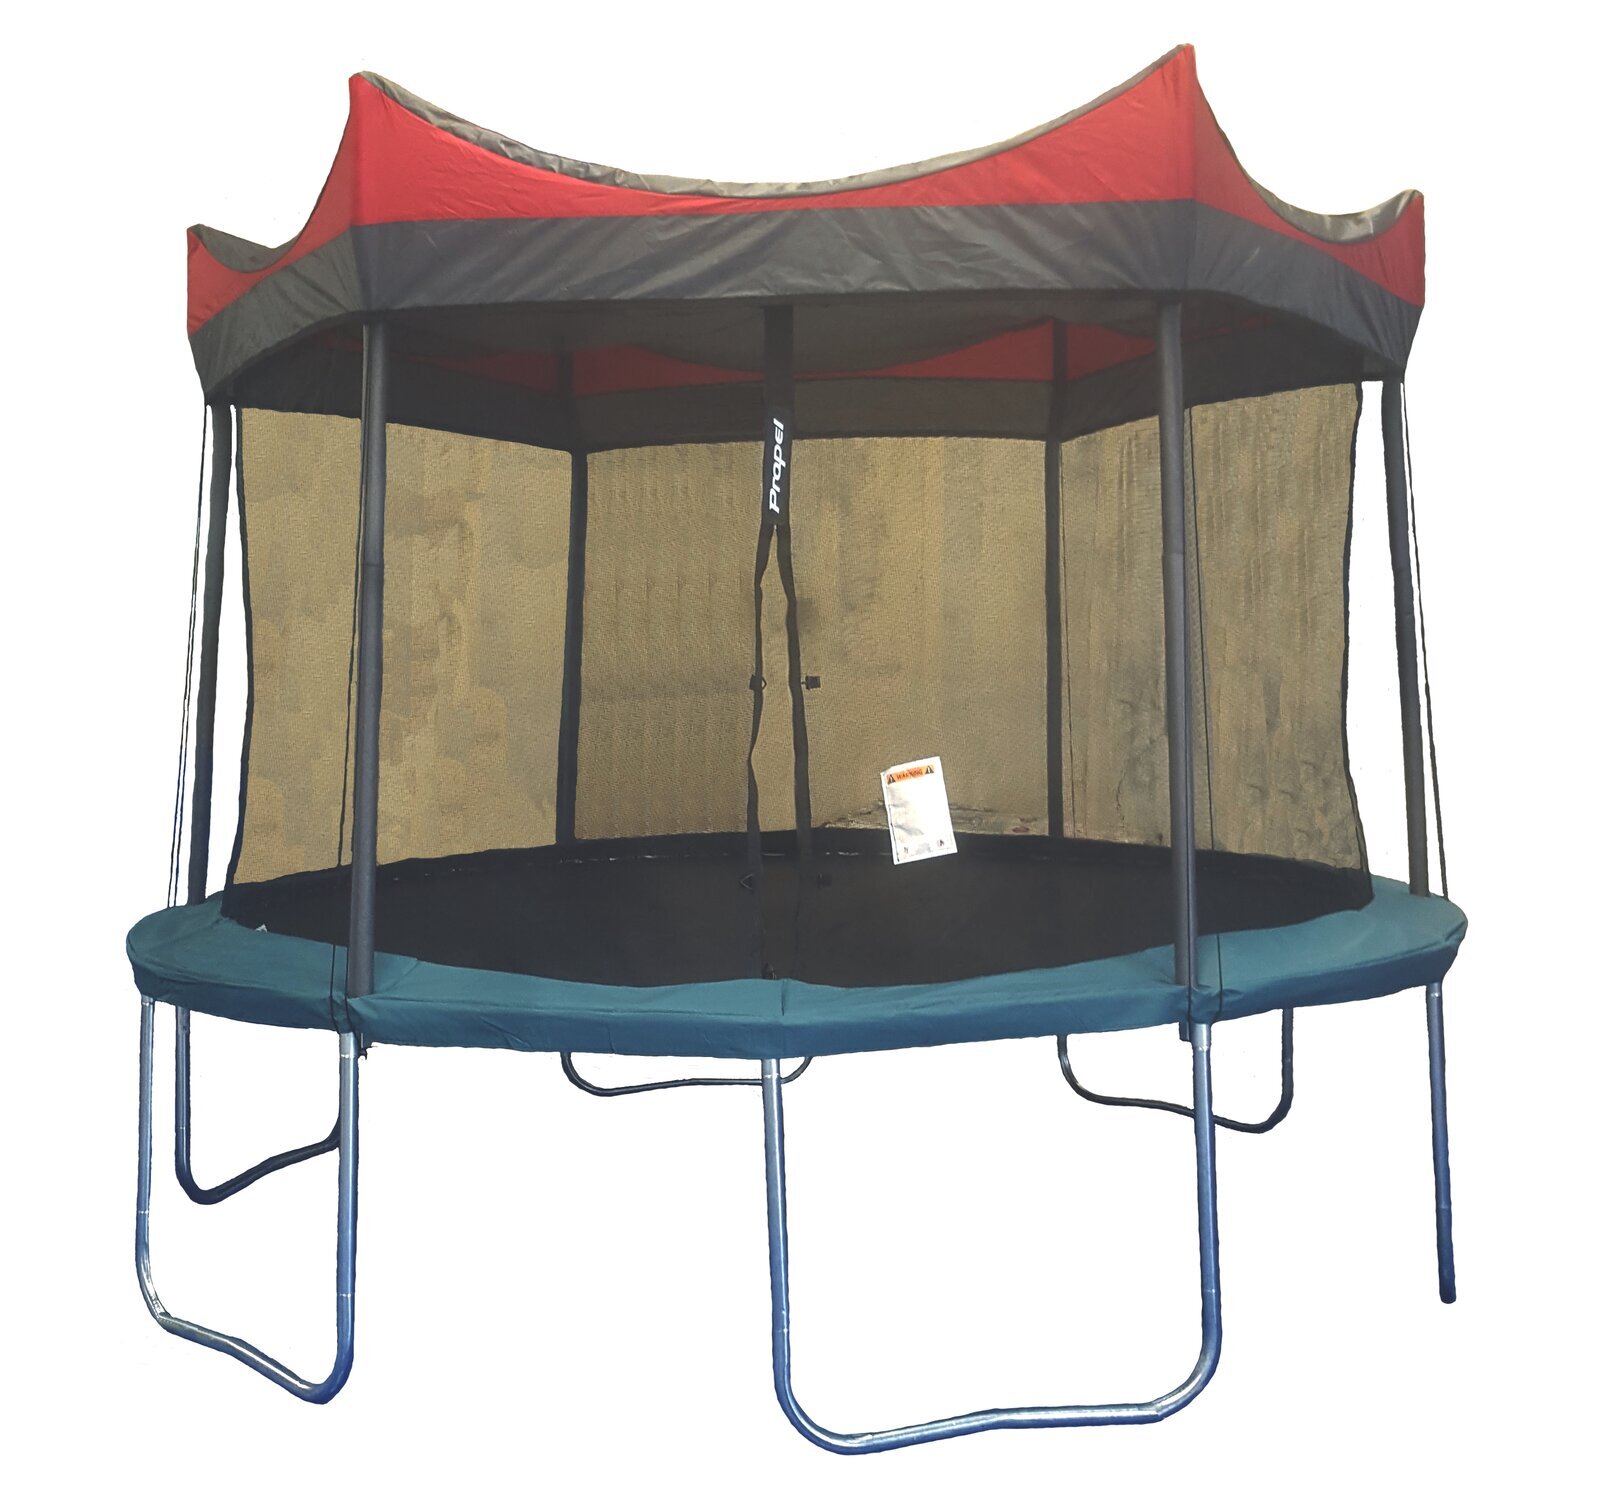 Shade Cover for Trampoline